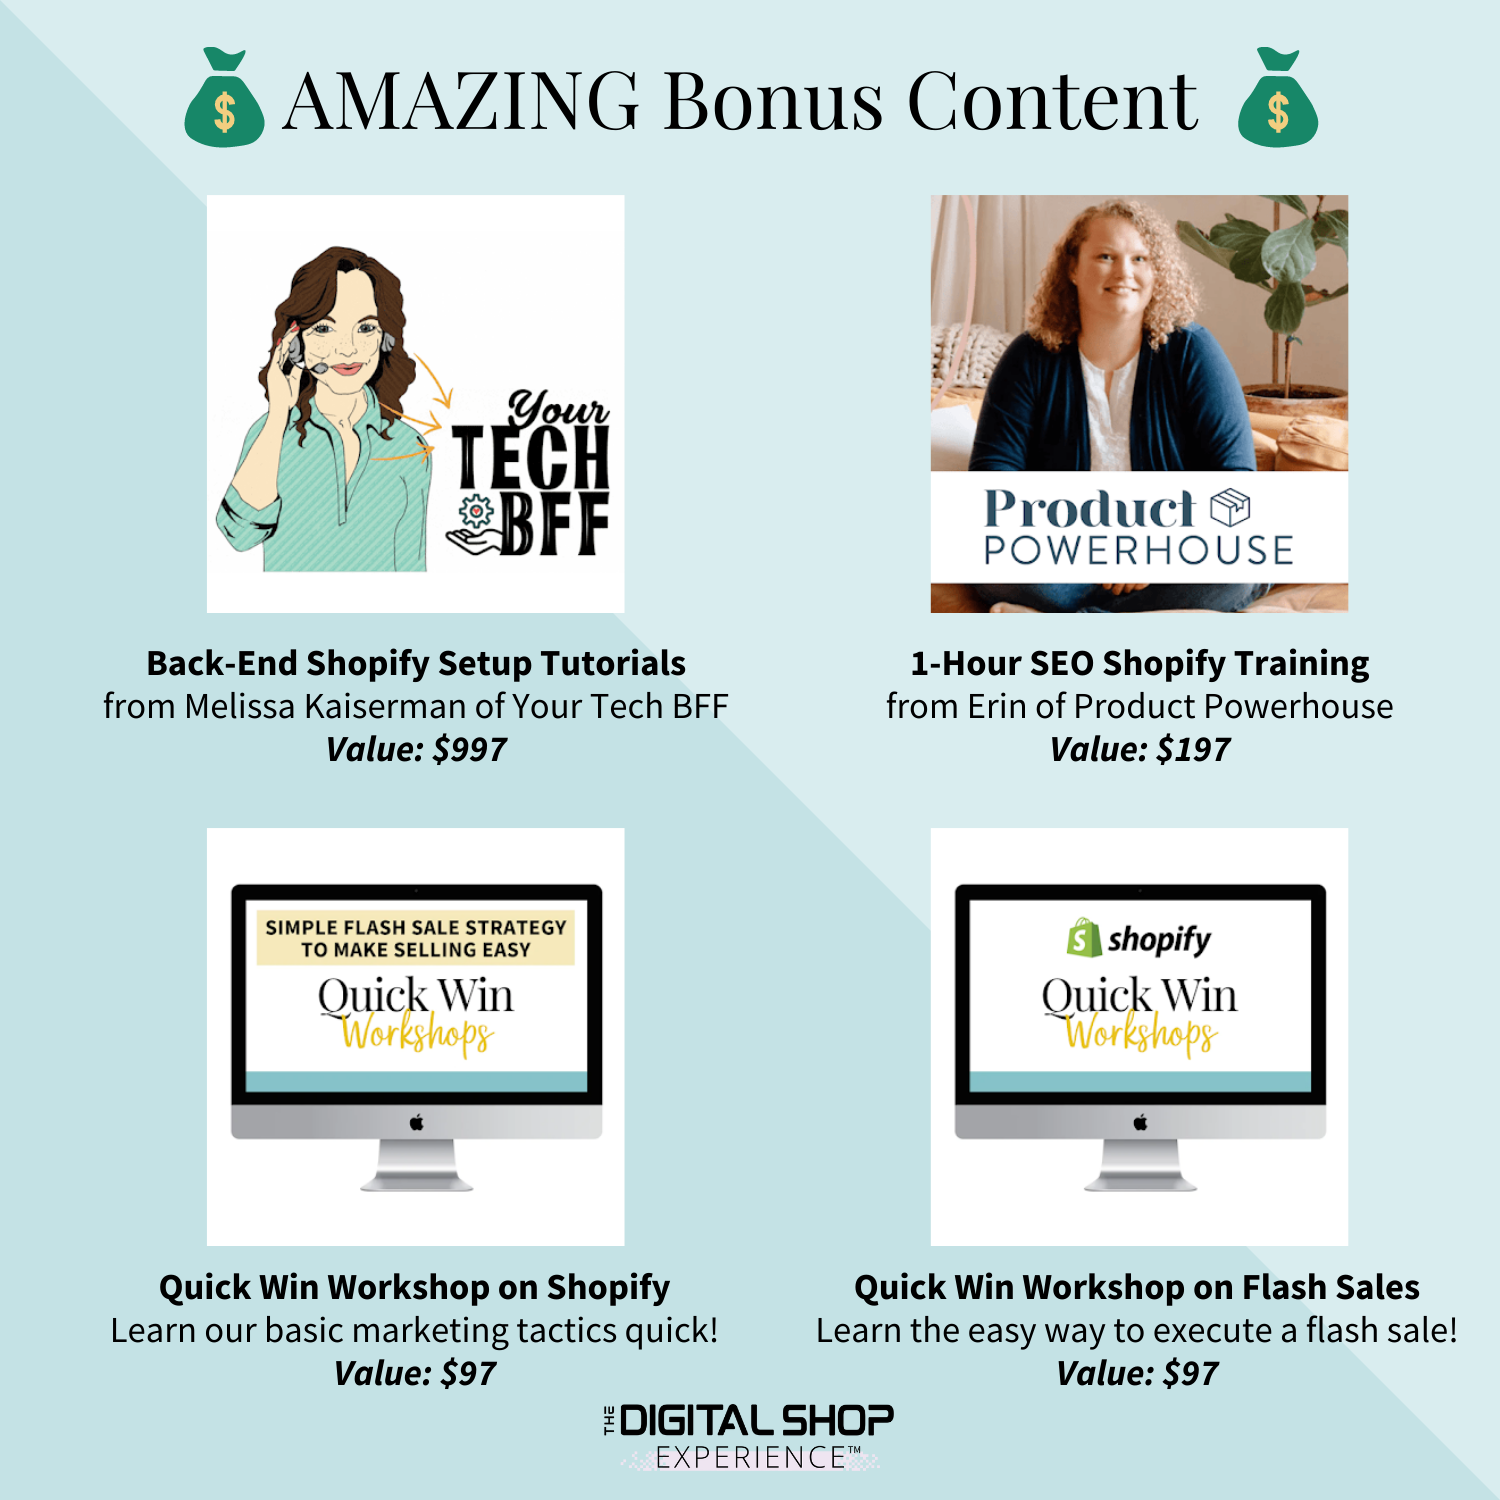 Bonus content of the Digital Shop Experience, including set up for a Shopify store and SEO strategy for a Shopify store